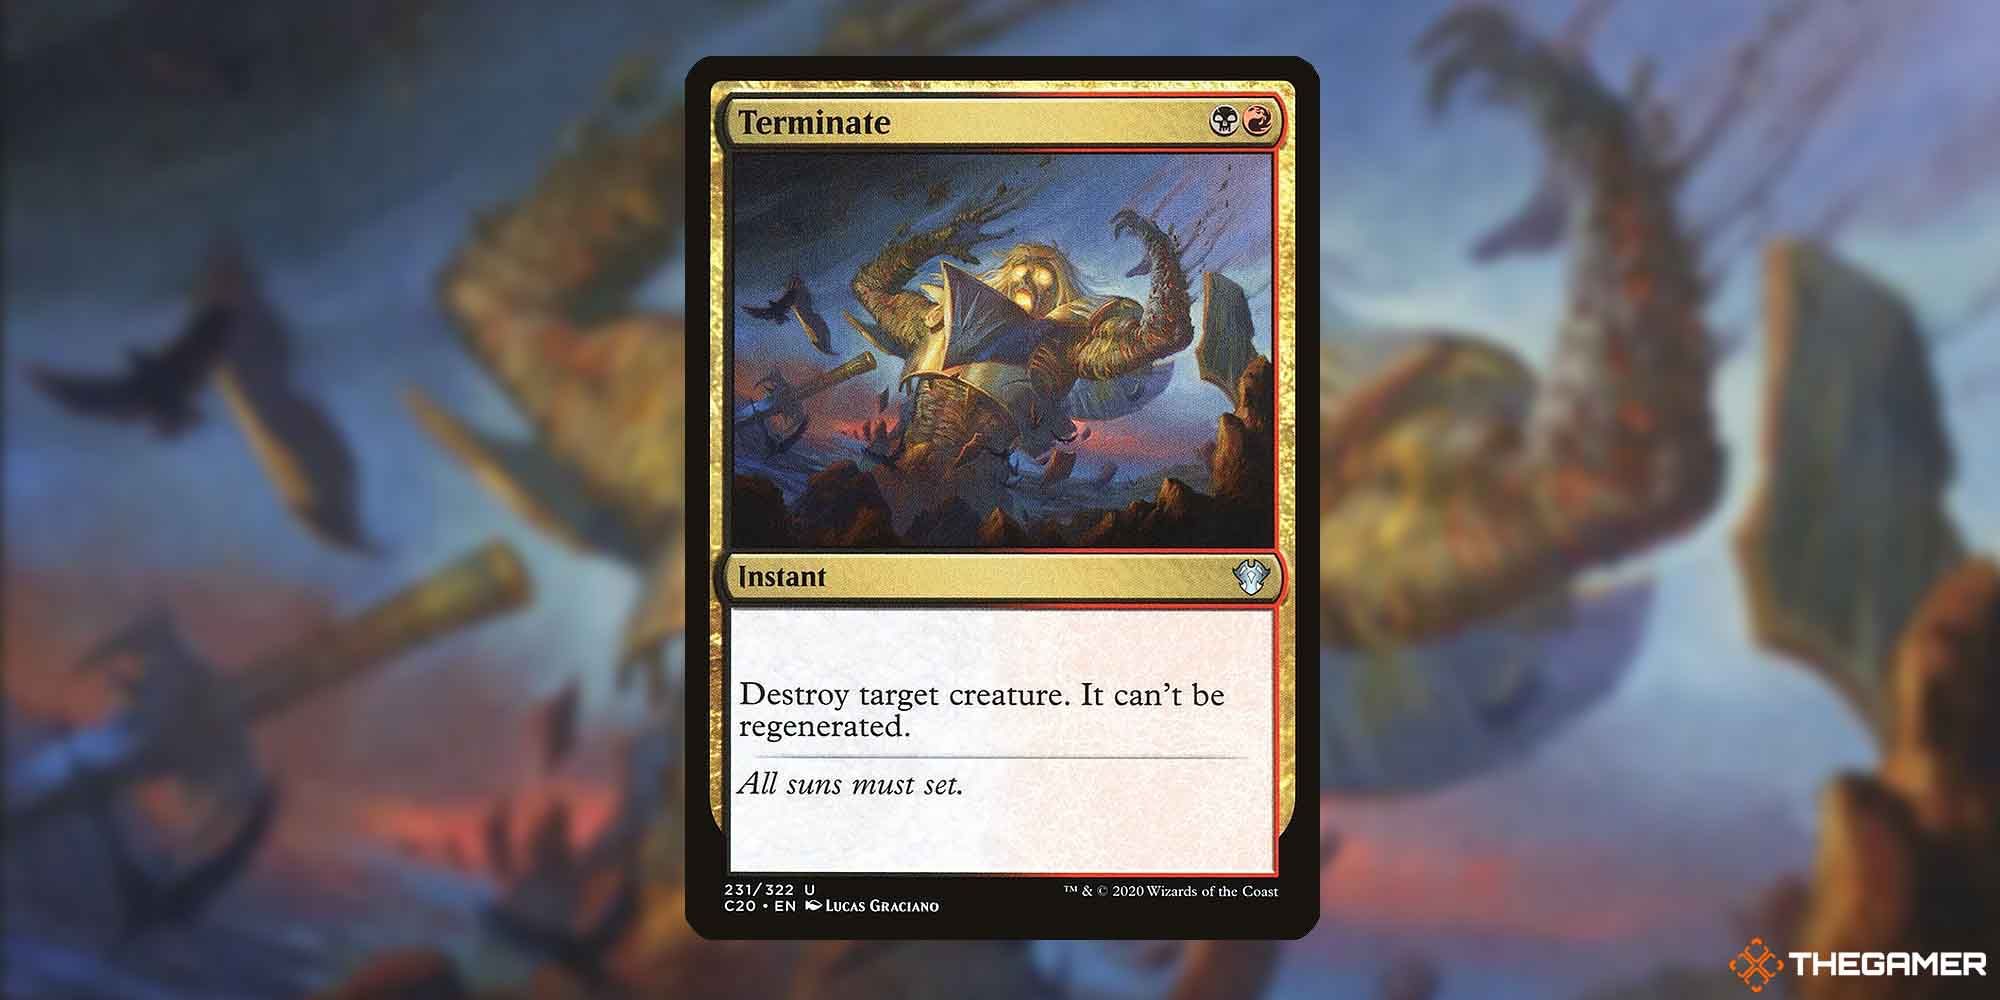 The Terminate Instant In Magic the Gathering